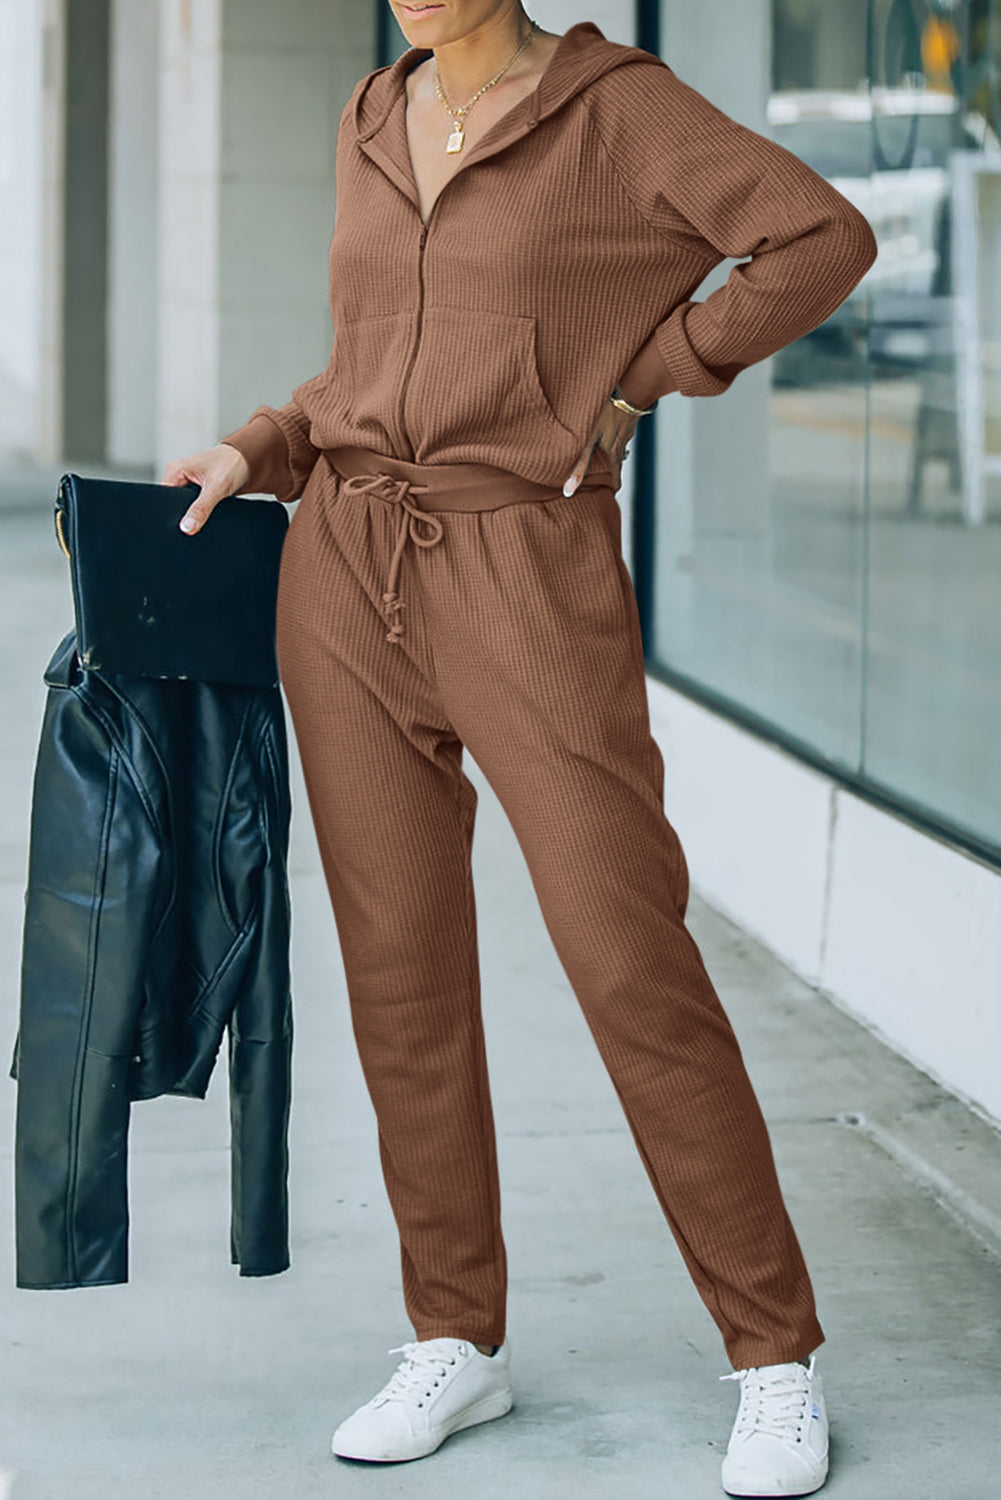 Cali Chic Brown Waffle Knit Zip-Up Hoodie and Pants Athleisure Outfit